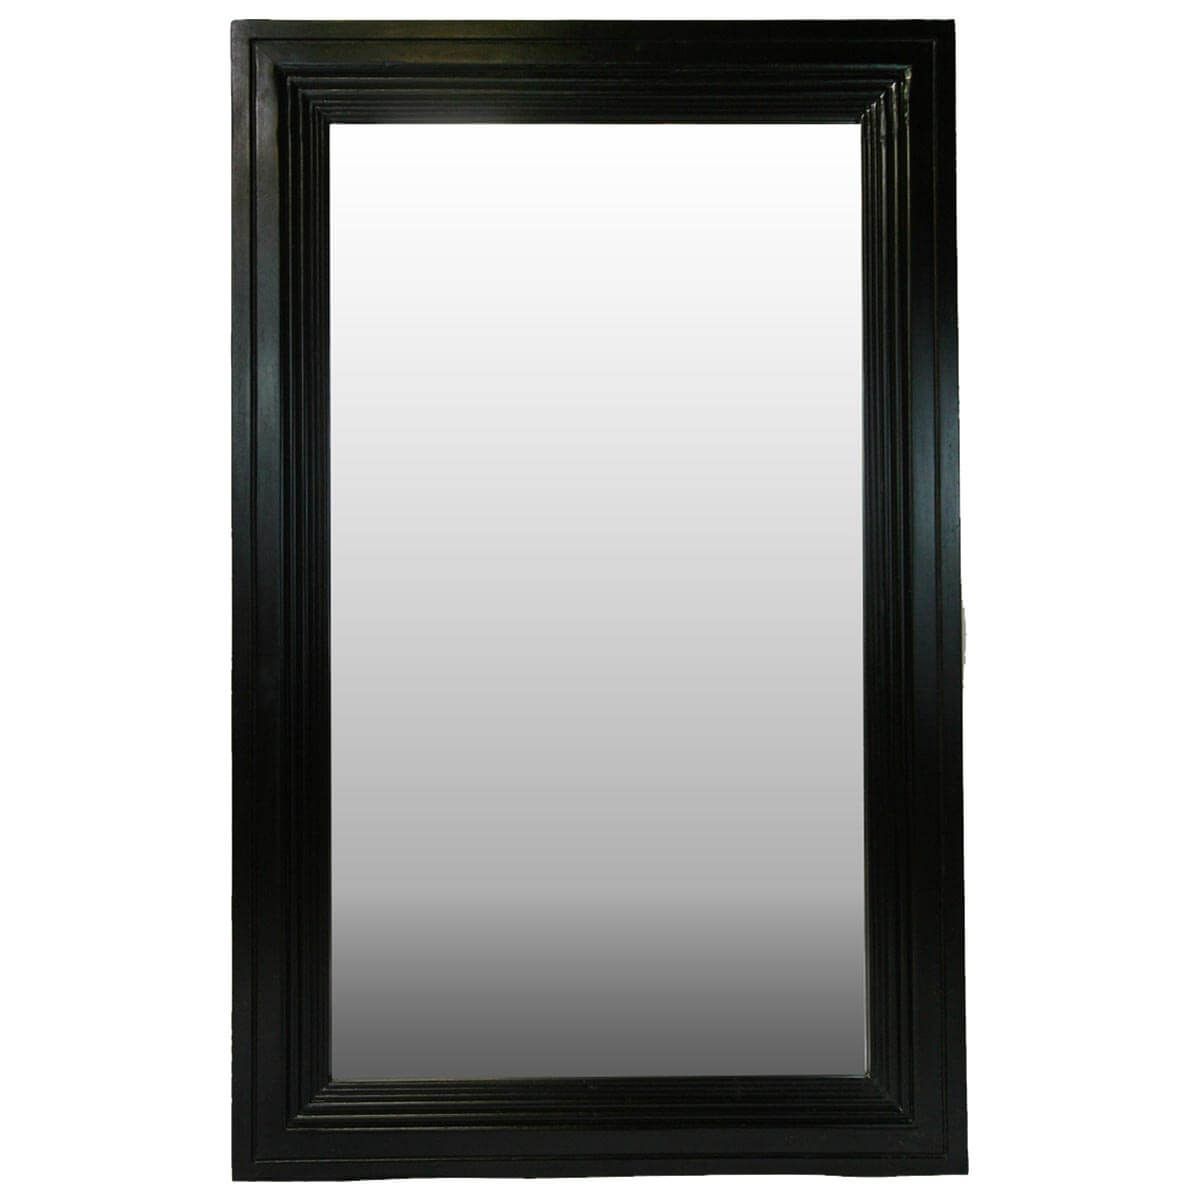 Frontier Rustic Acacia Wood Black Distressed Wall Mirror Frame Intended For Rustic Industrial Black Frame Wall Mirrors (View 3 of 15)